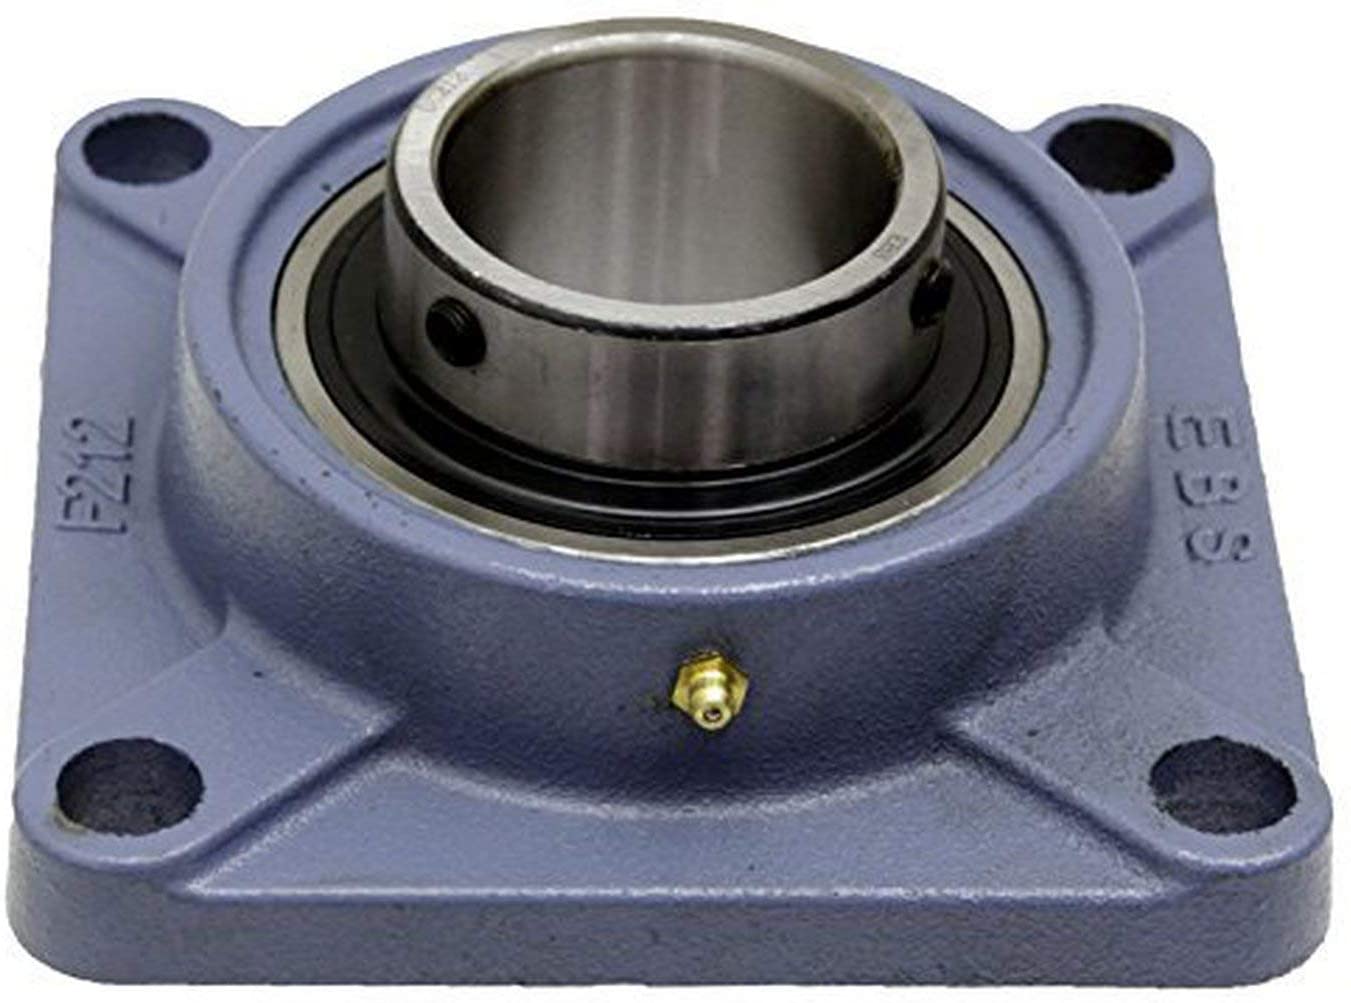 UCF207  GENERIC Normal duty 4 bolt cast iron flange self-lube housed unit - Metric Thumbnail